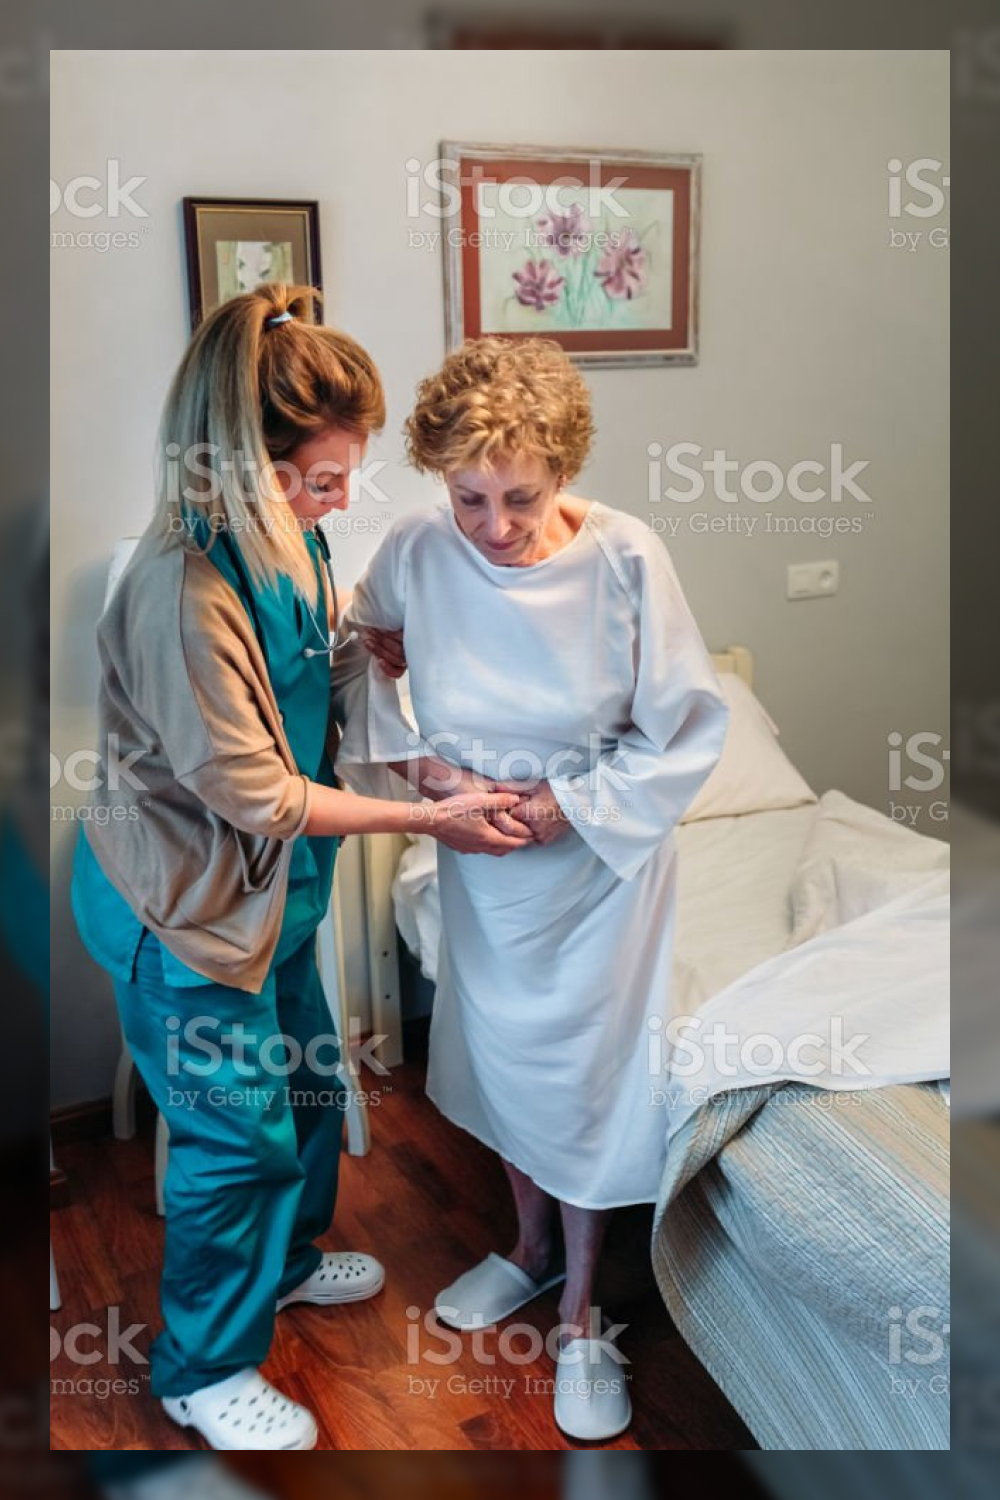 Caregiver helping elderly patient to stand up stock photo.